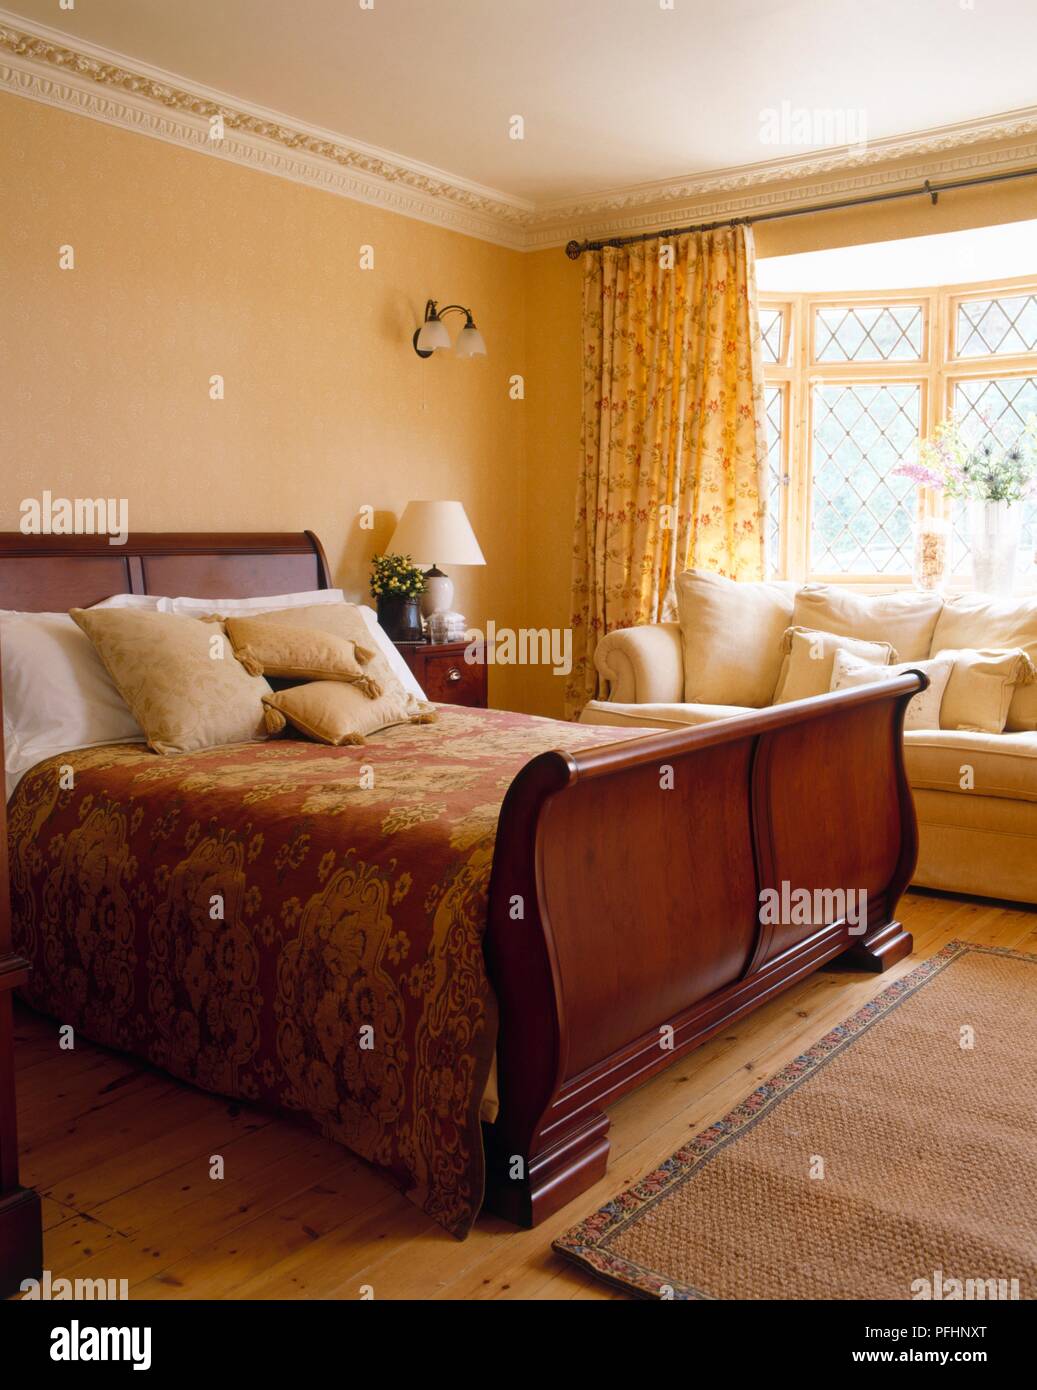 Bedroom with double sleigh bed and cream coloured sofa Stock Photo